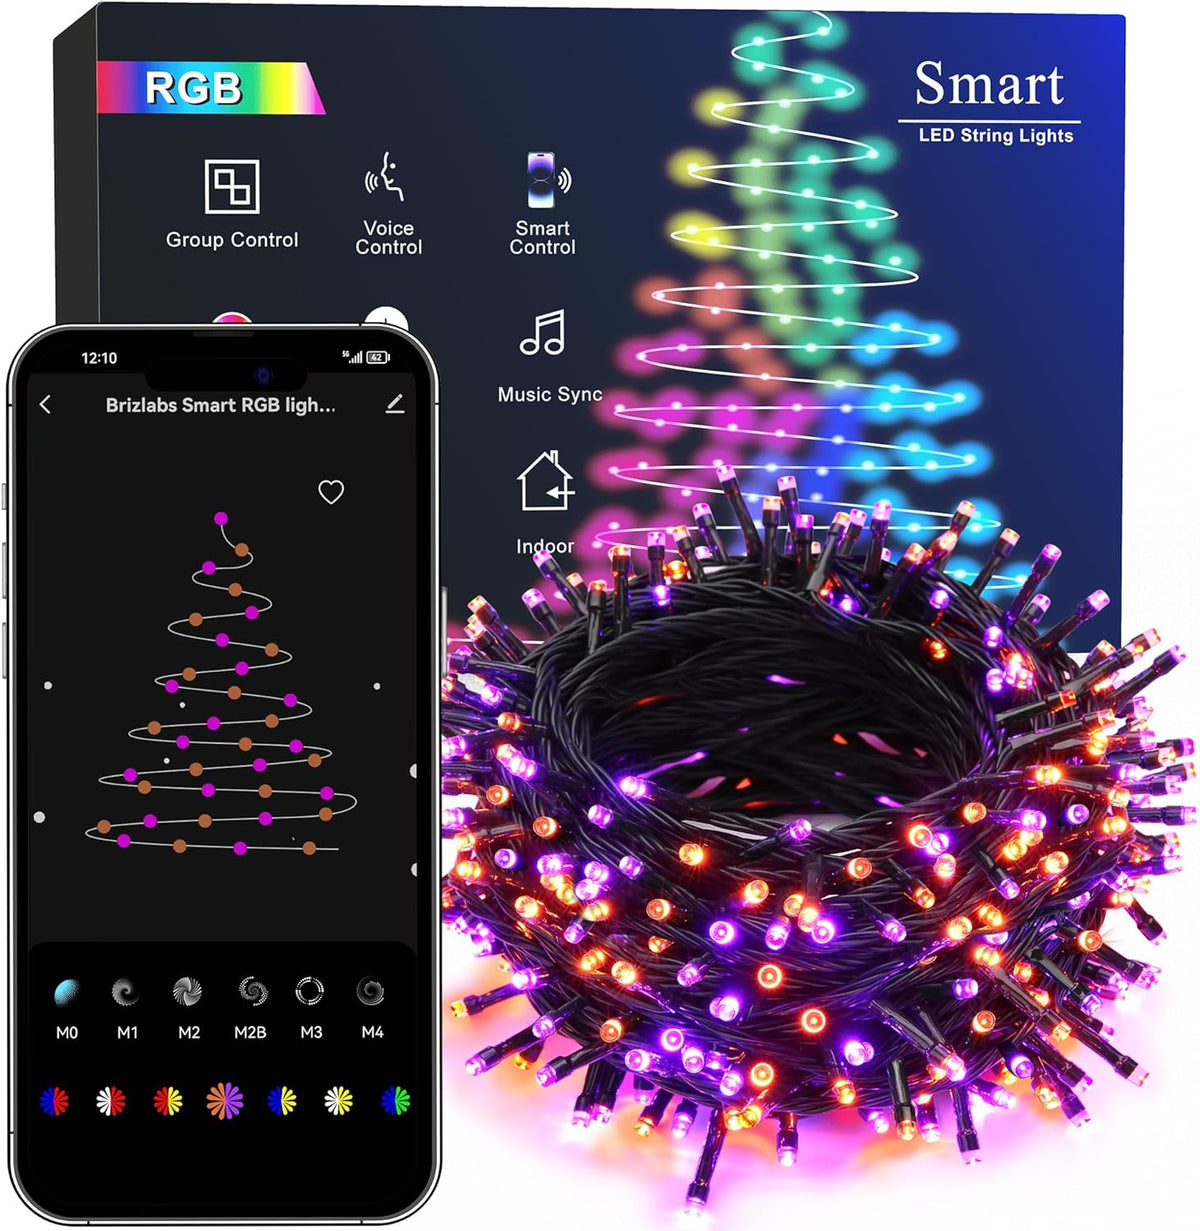 BrizLabs Smart String Lights 163ft 498 LED App Controlled Work with Alexa & Google Home PREMIUM SERIES